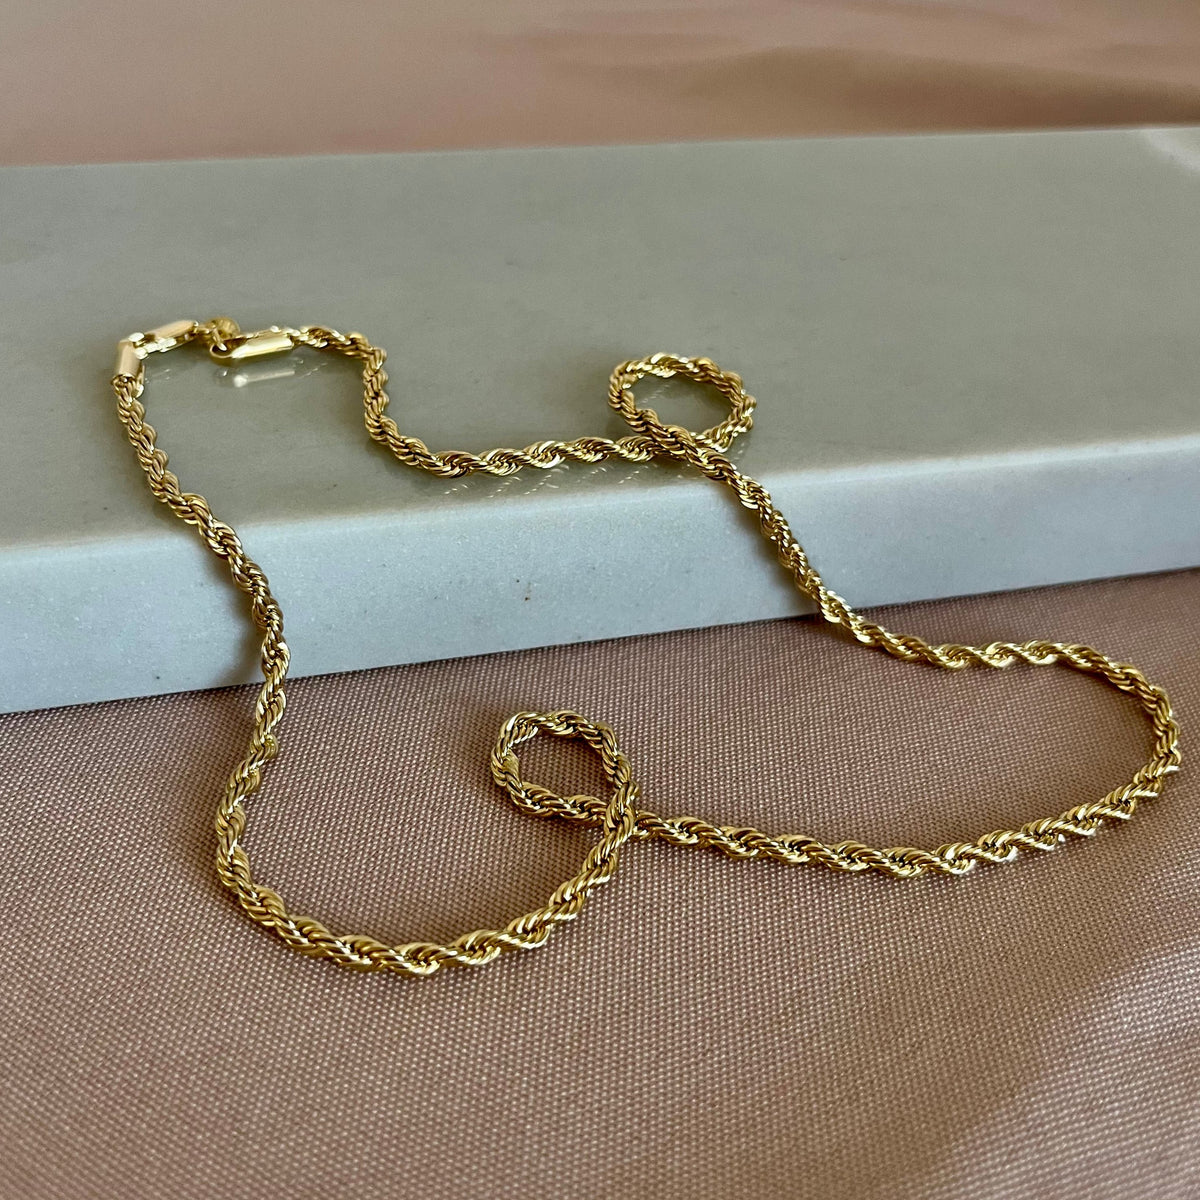 3mm rope chain necklace